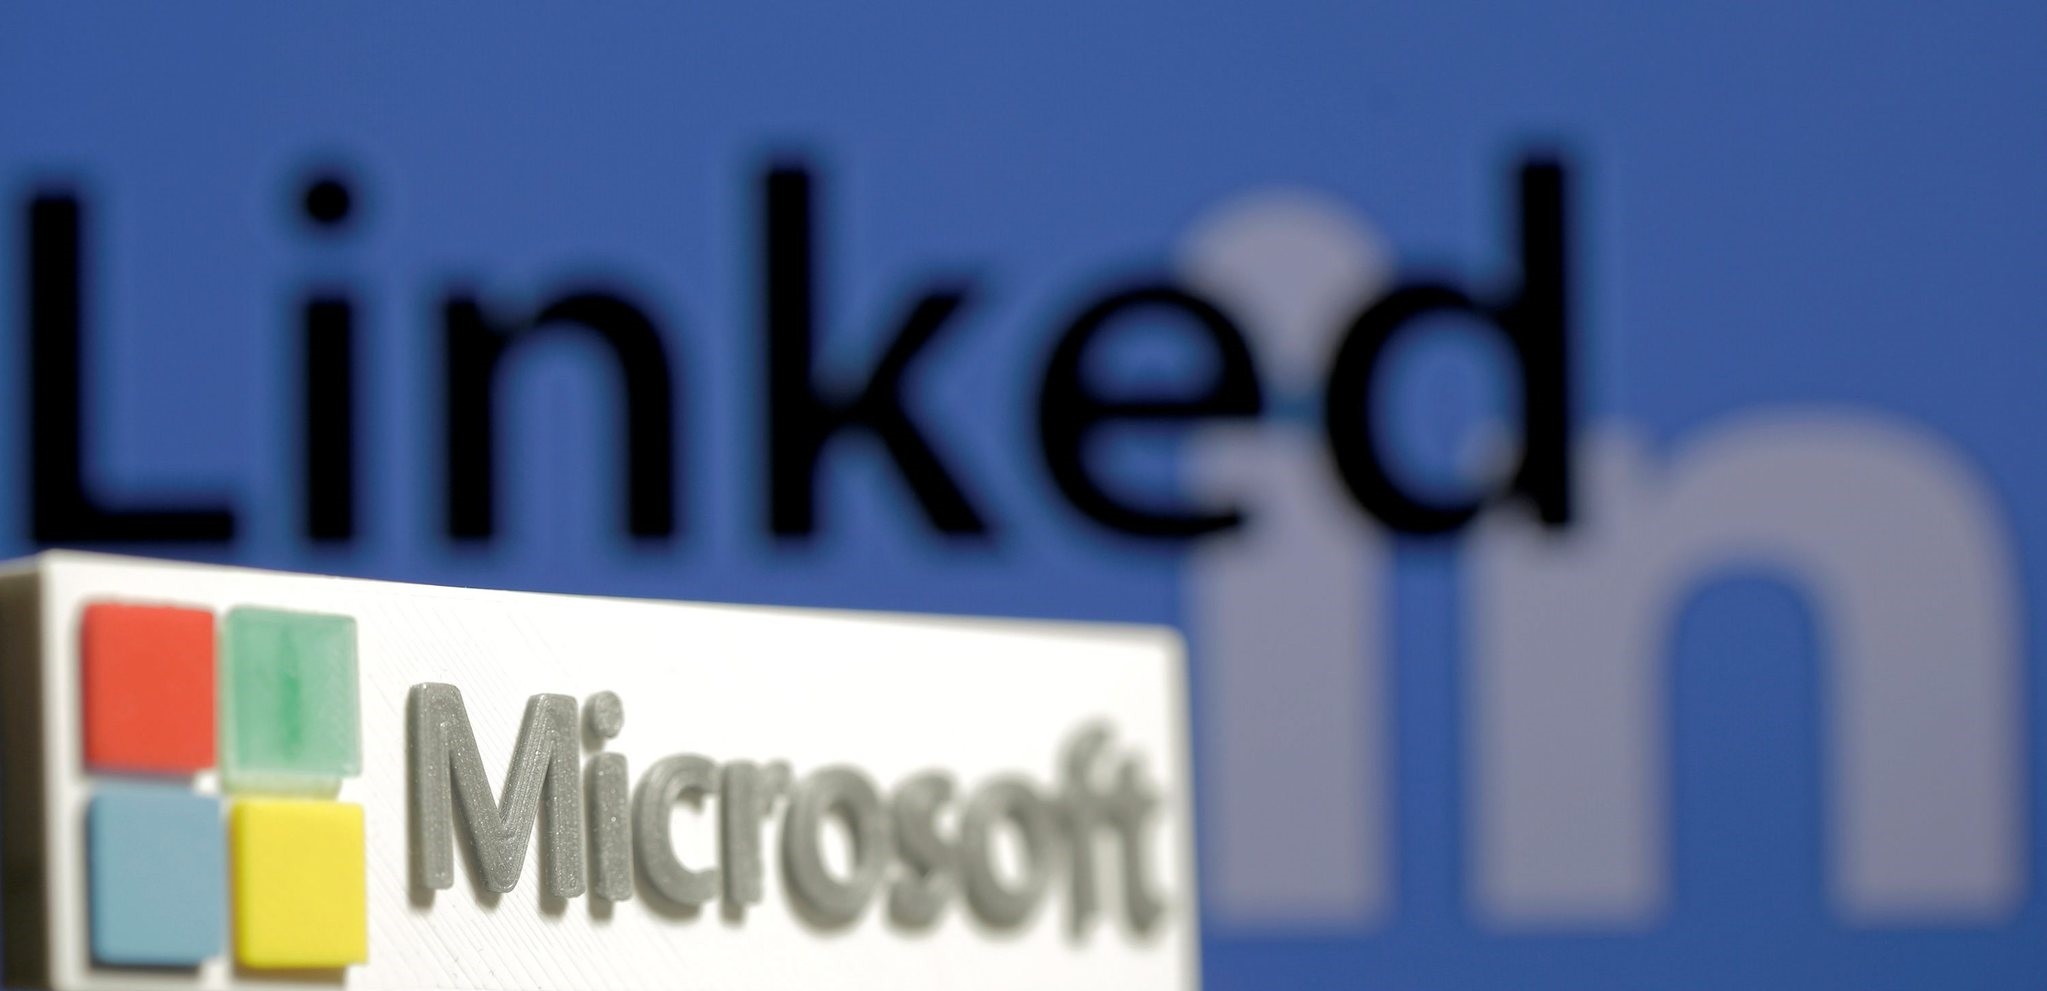 A 3D printed logo of Microsoft is seen in front of a displayed LinkedIn logo in this illustration taken June 13, 2016. (REUTERS Photo)